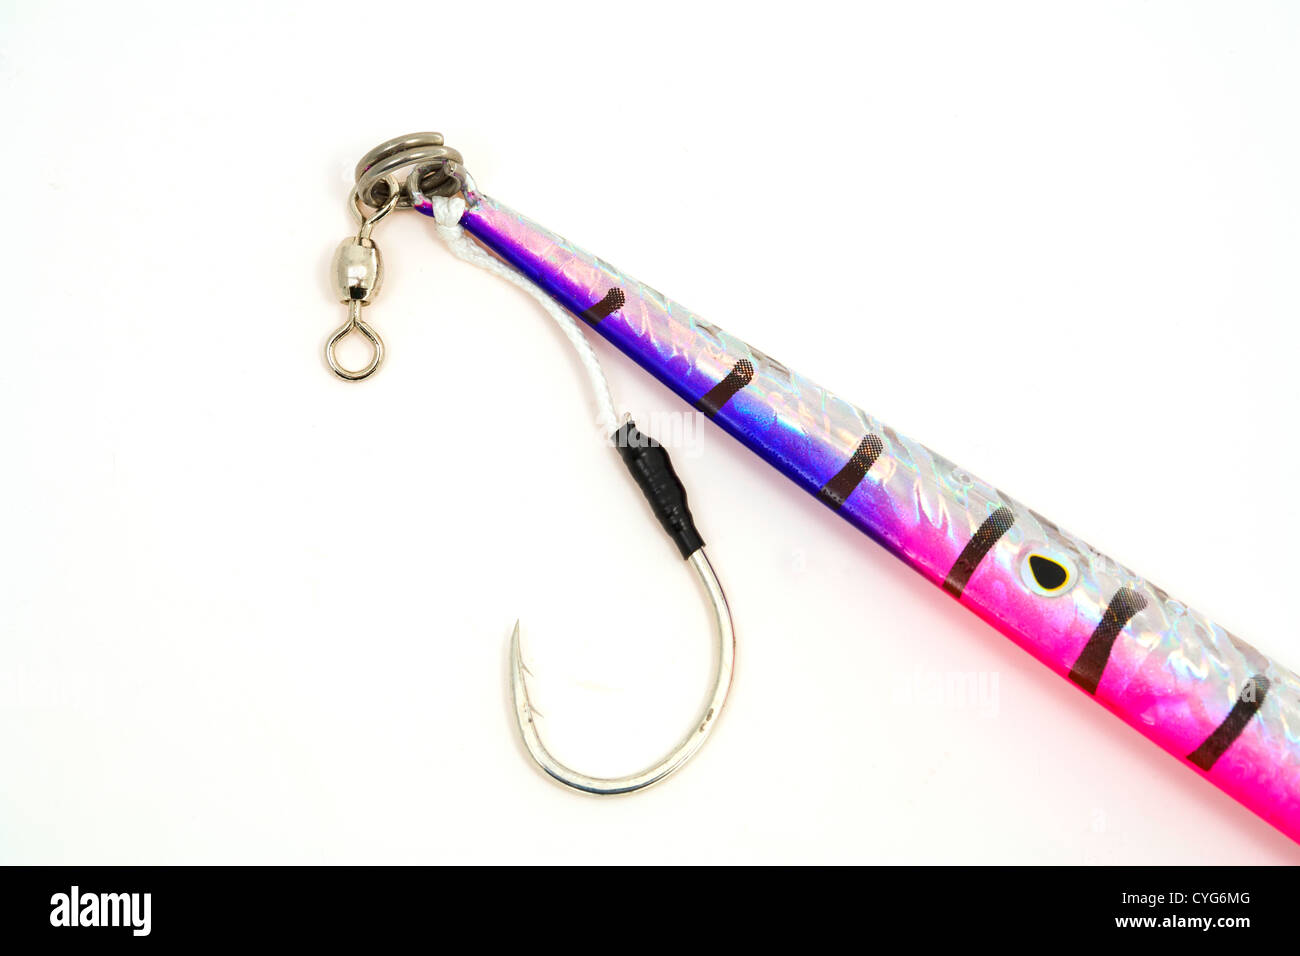 Colorful Jig showing Single Assist hook and swivel. Stock Photo